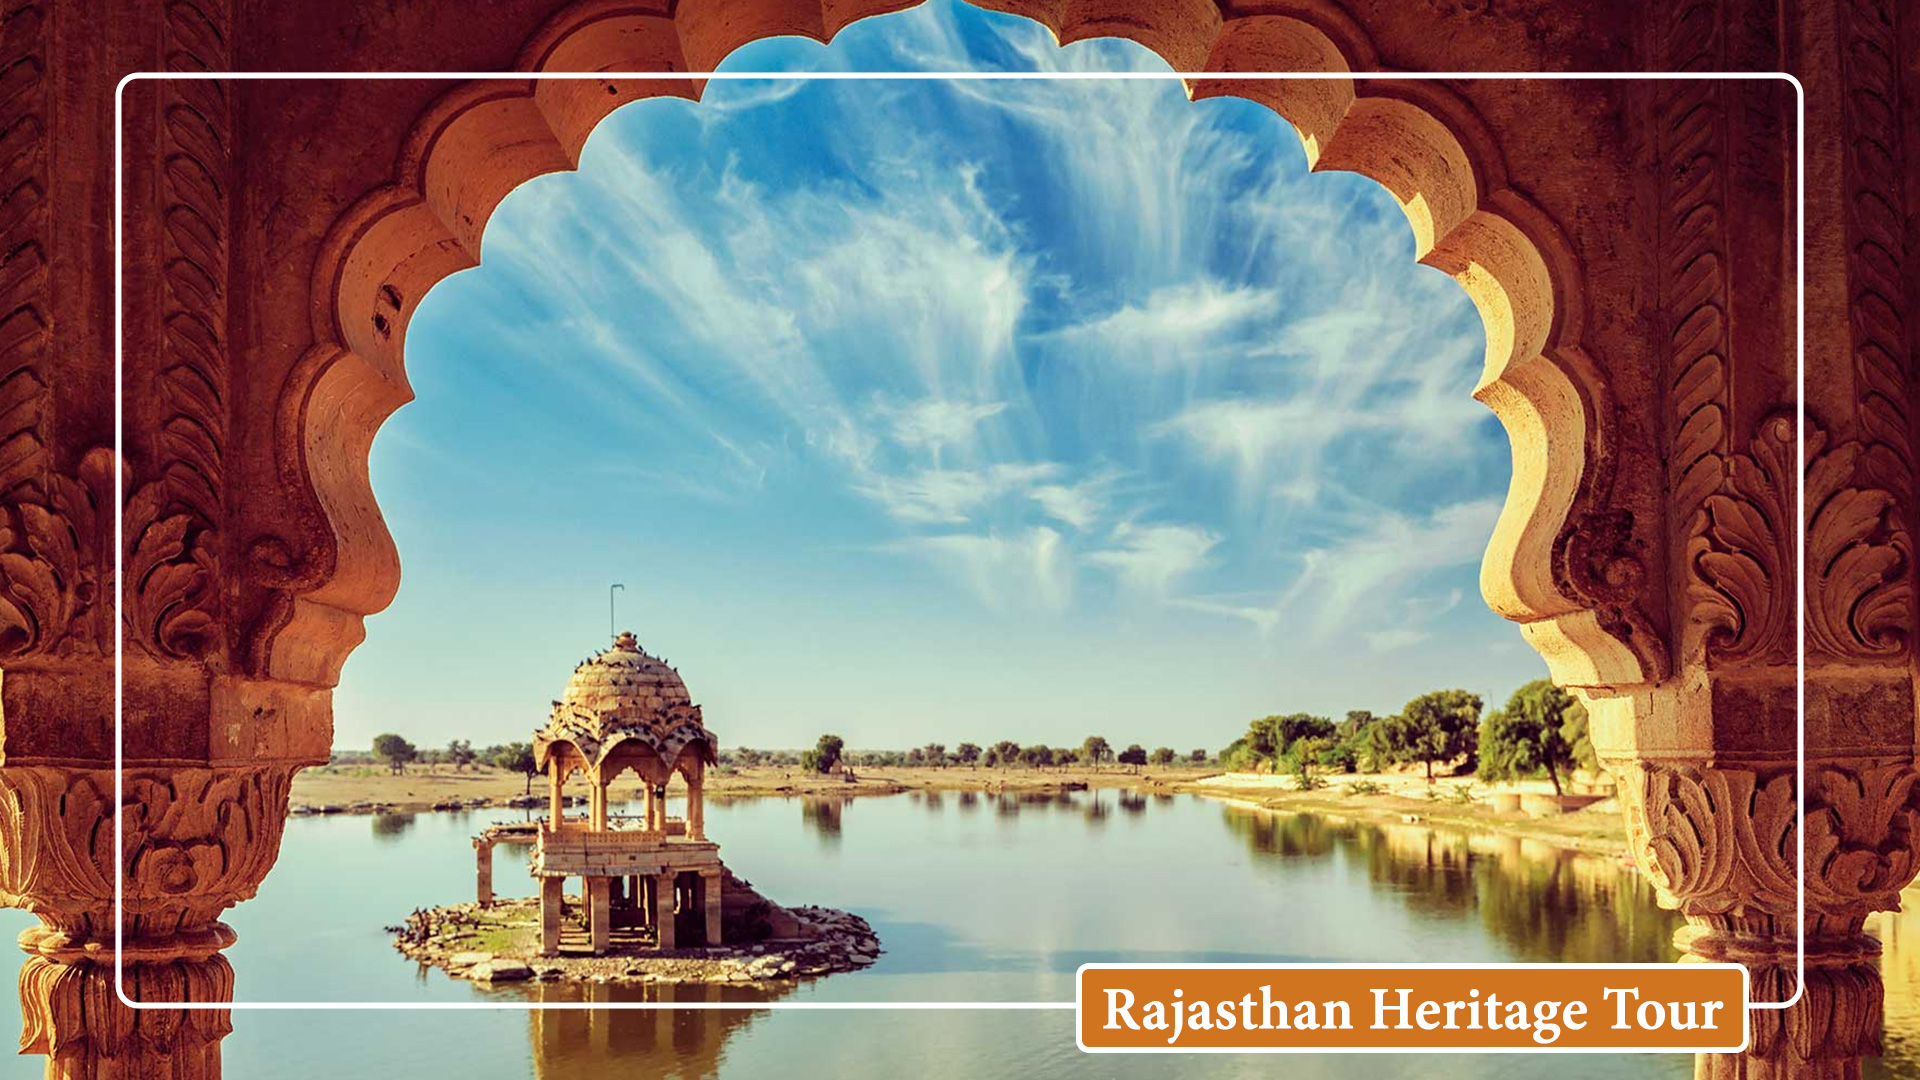 This image shows Rajasthan Heritage Tour with beautiful view of Rajasthan..